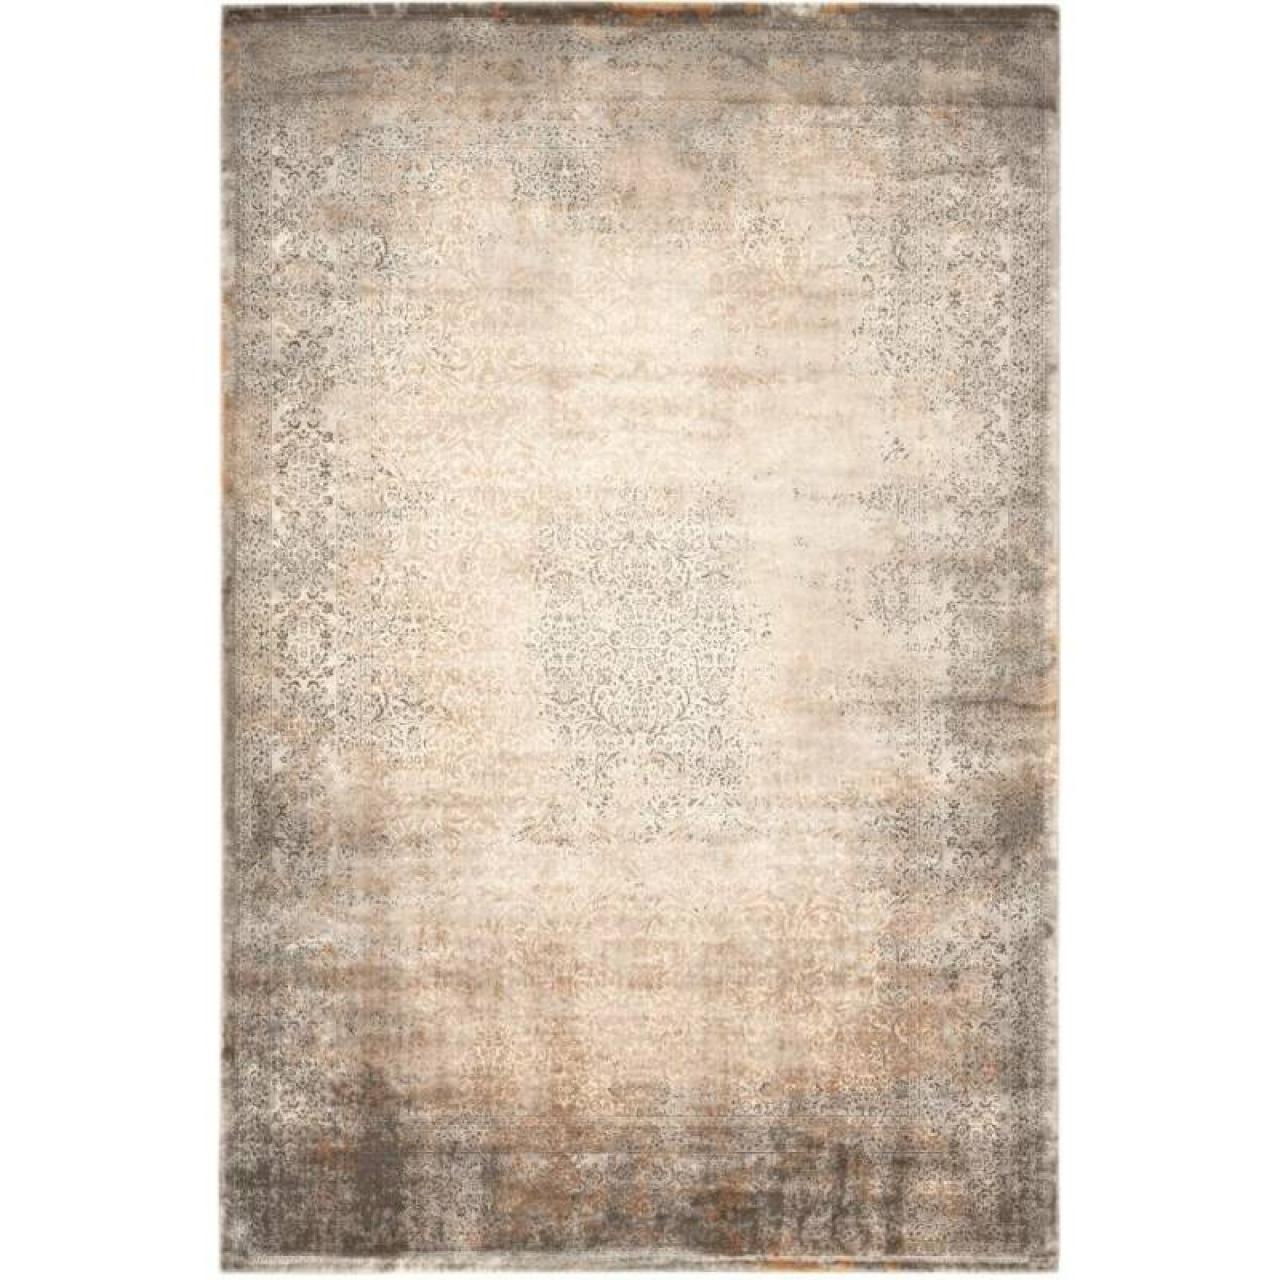 Obsession Haute Couture Jewel 954 Taupe szőnyeg-240x340